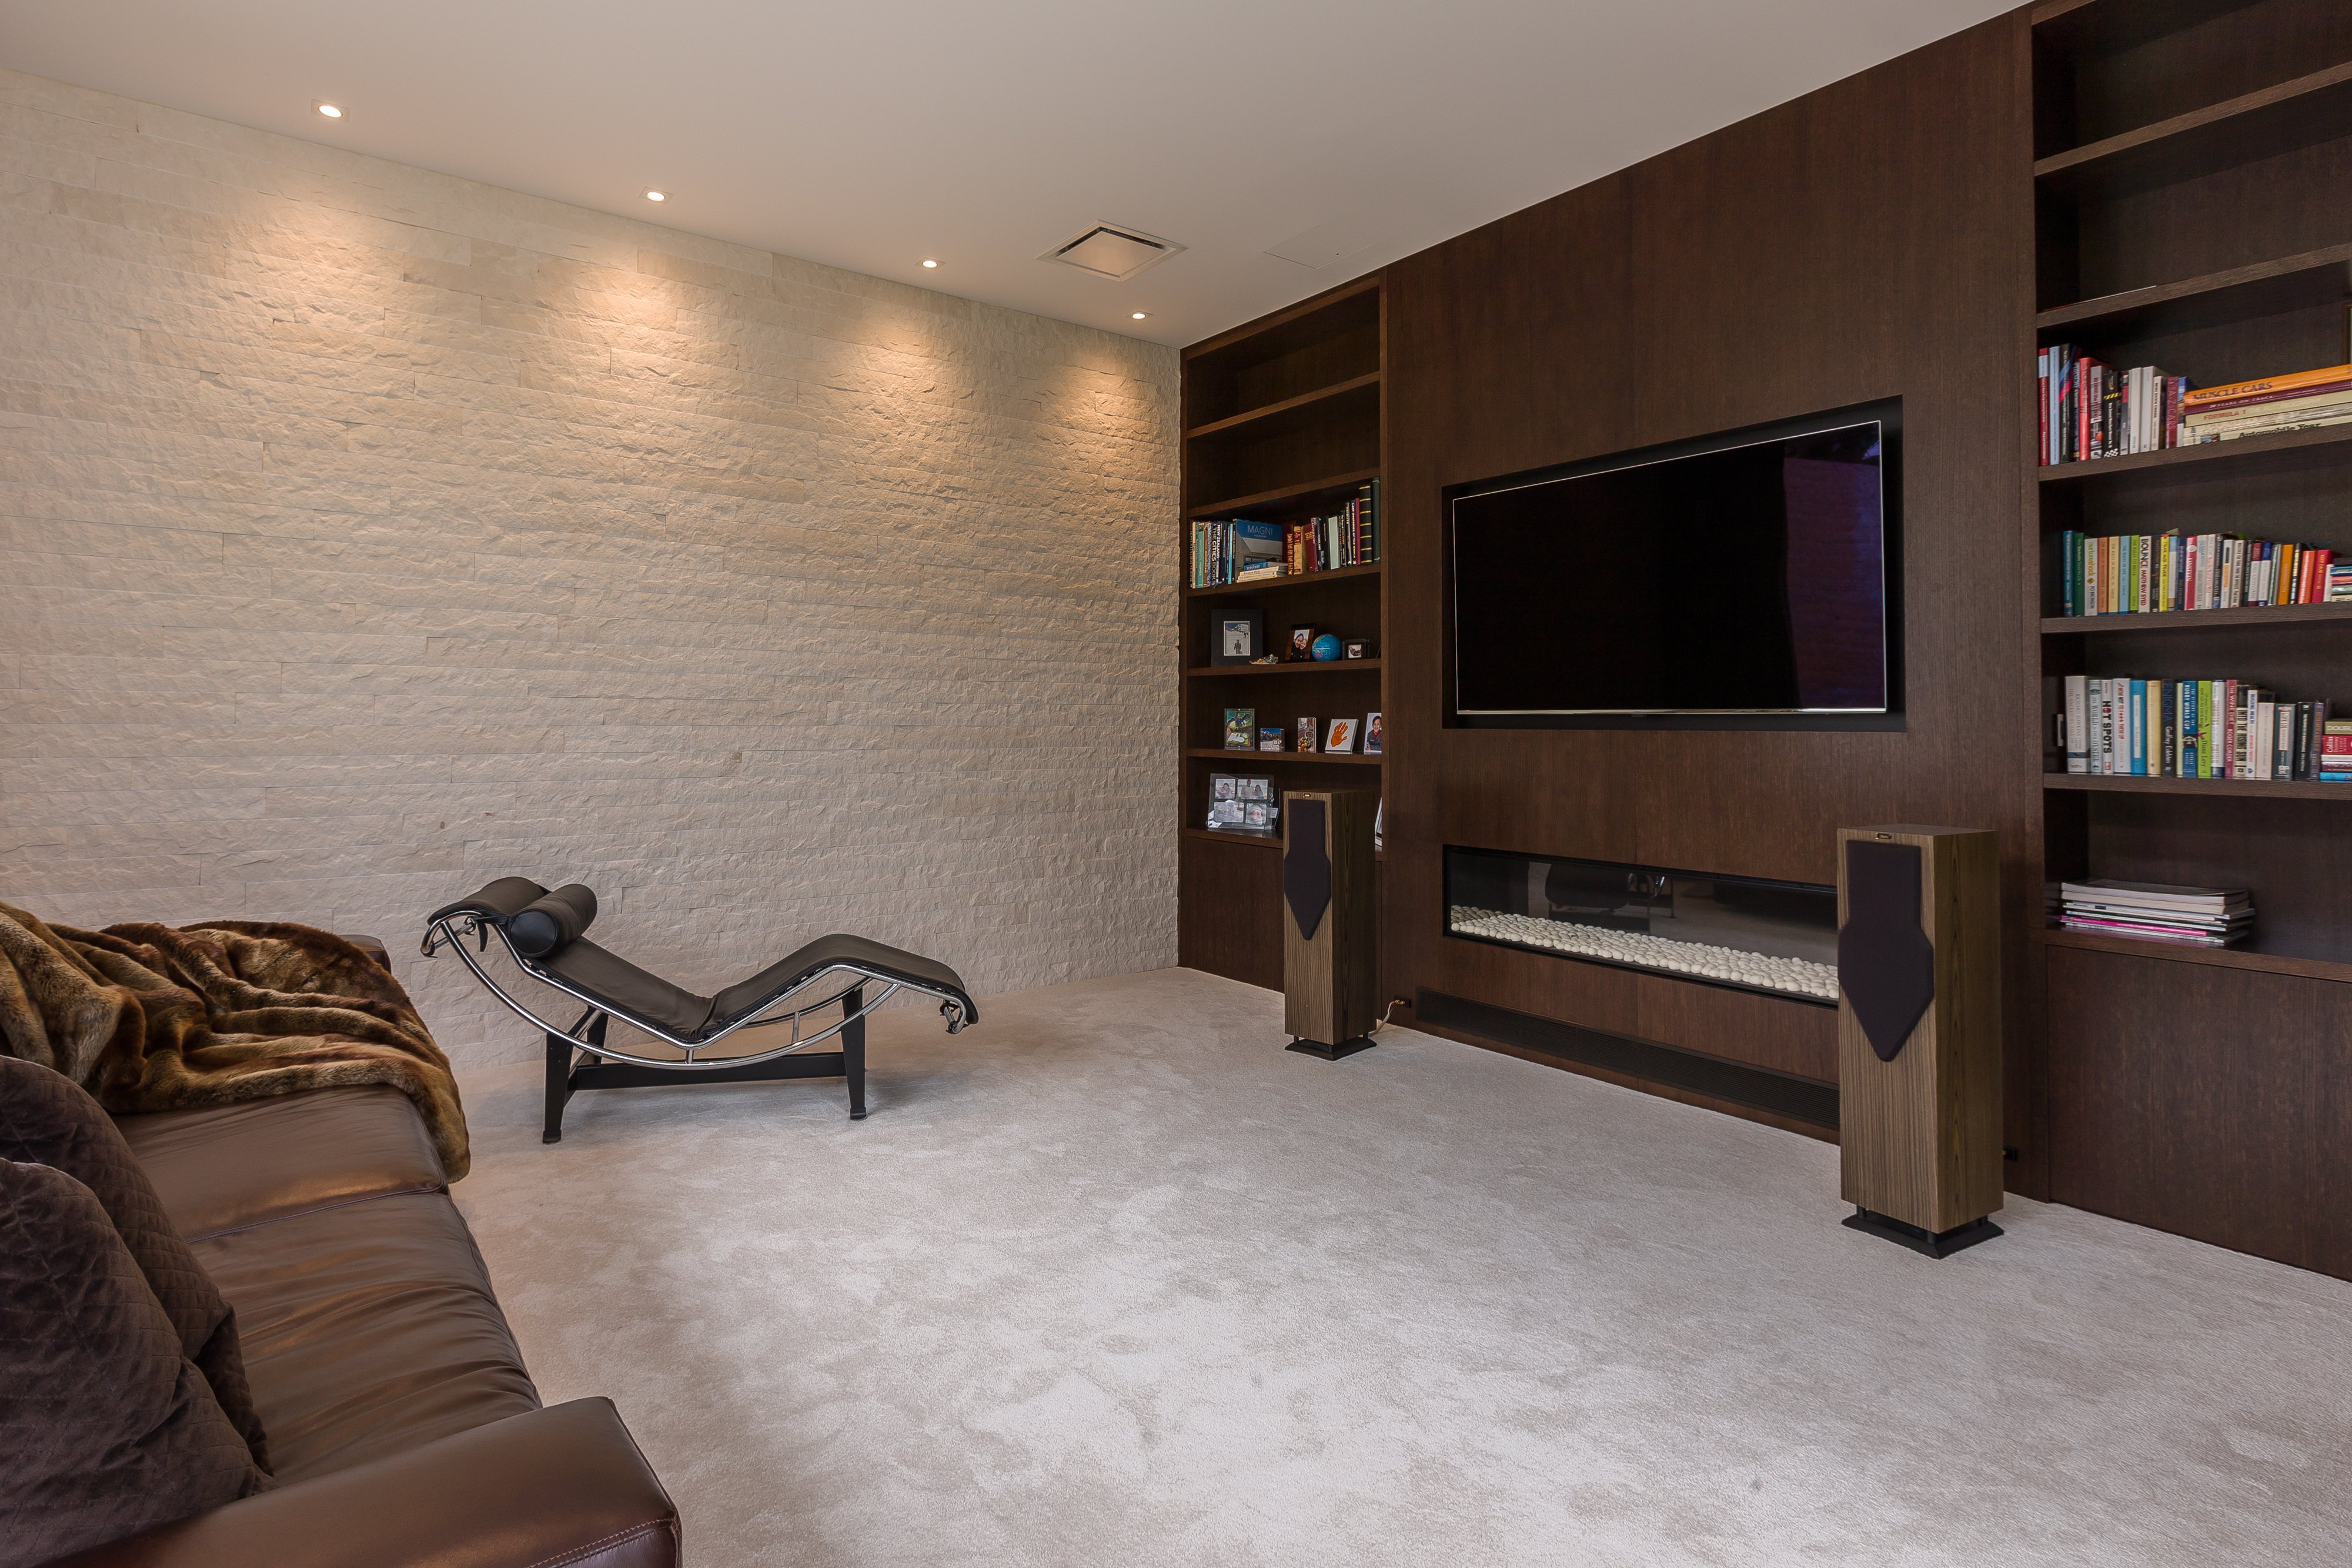 The DX1500 was specified in both living areas and surrounded in the same rich dark oak cabinetry.